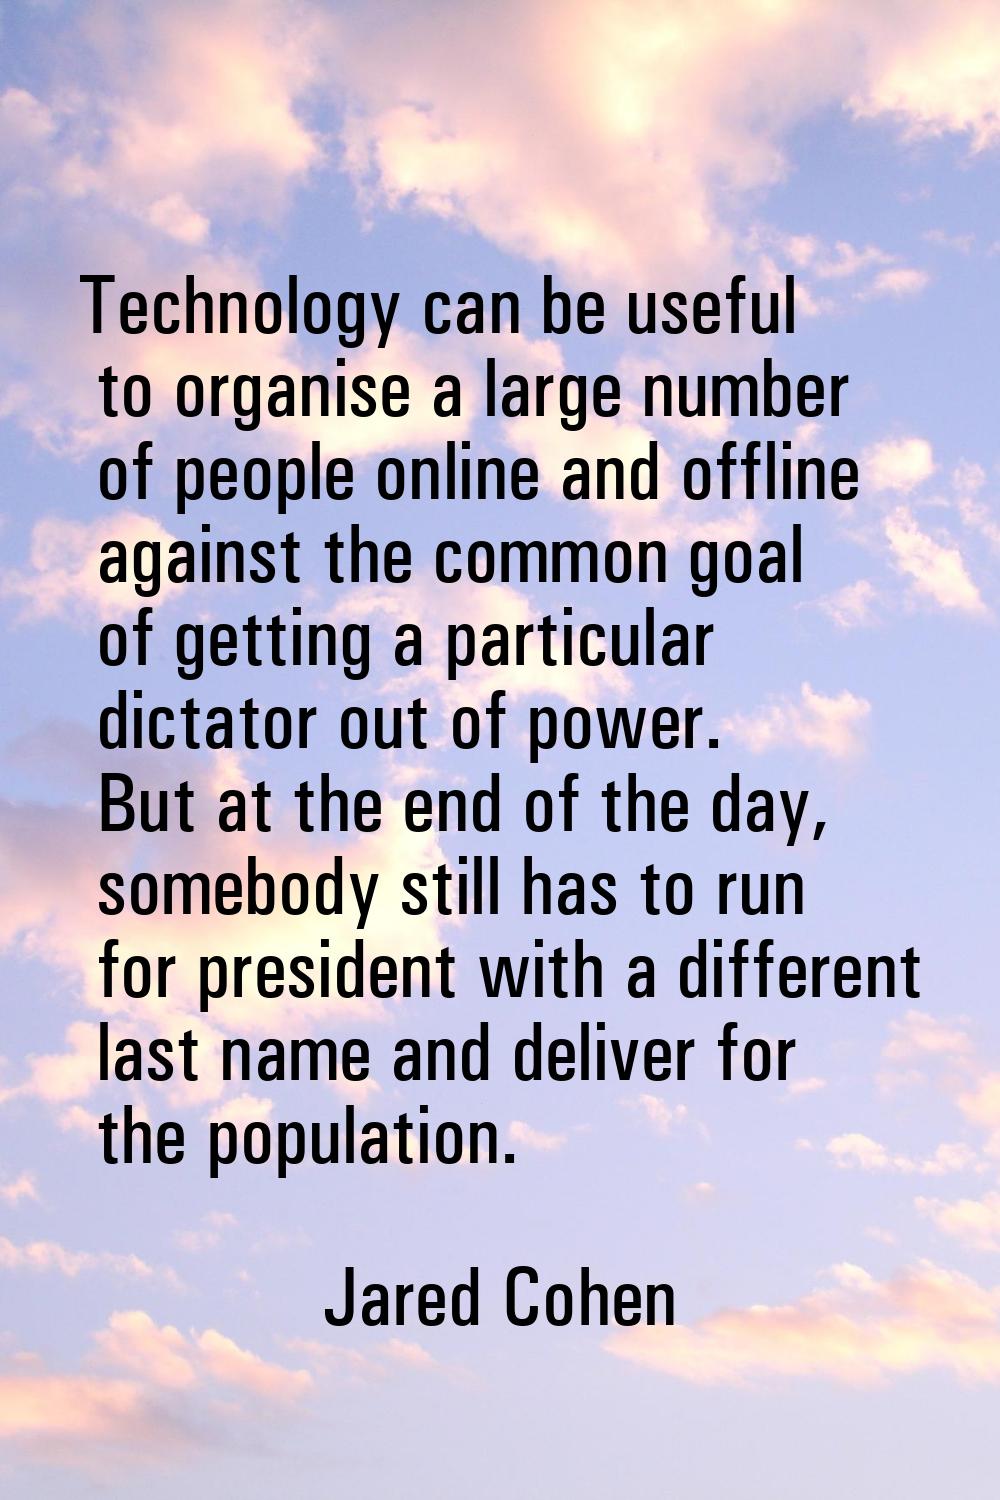 Technology can be useful to organise a large number of people online and offline against the common